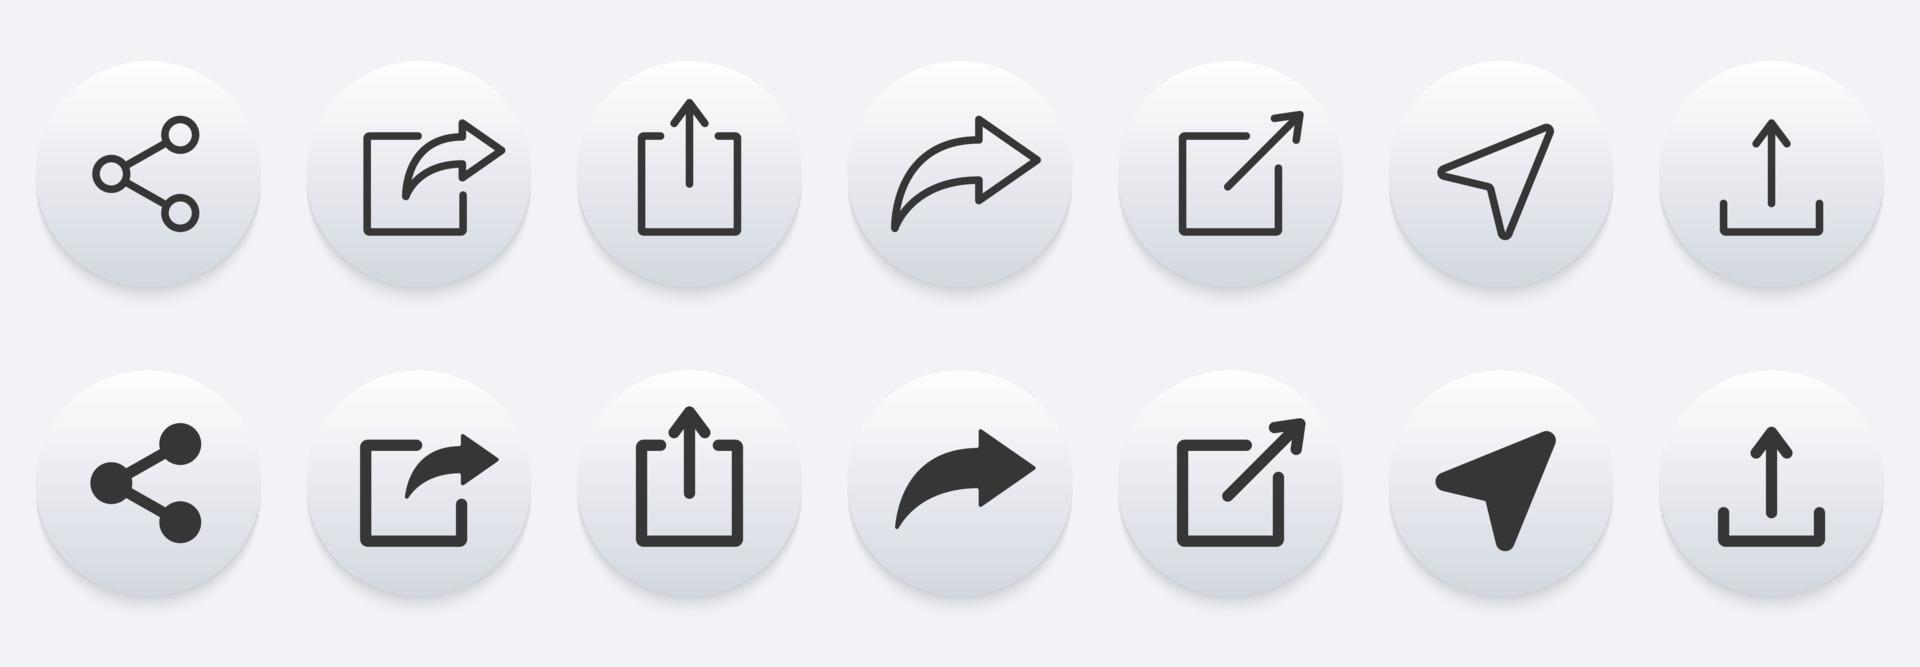 Share Link Button for Social Media Line and Silhouette Icon. Arrows Symbol Share Link for Web Site Outline Icon. Send Data Sign Linear Pictogram. Editable Stroke. Isolated Vector Illustration.